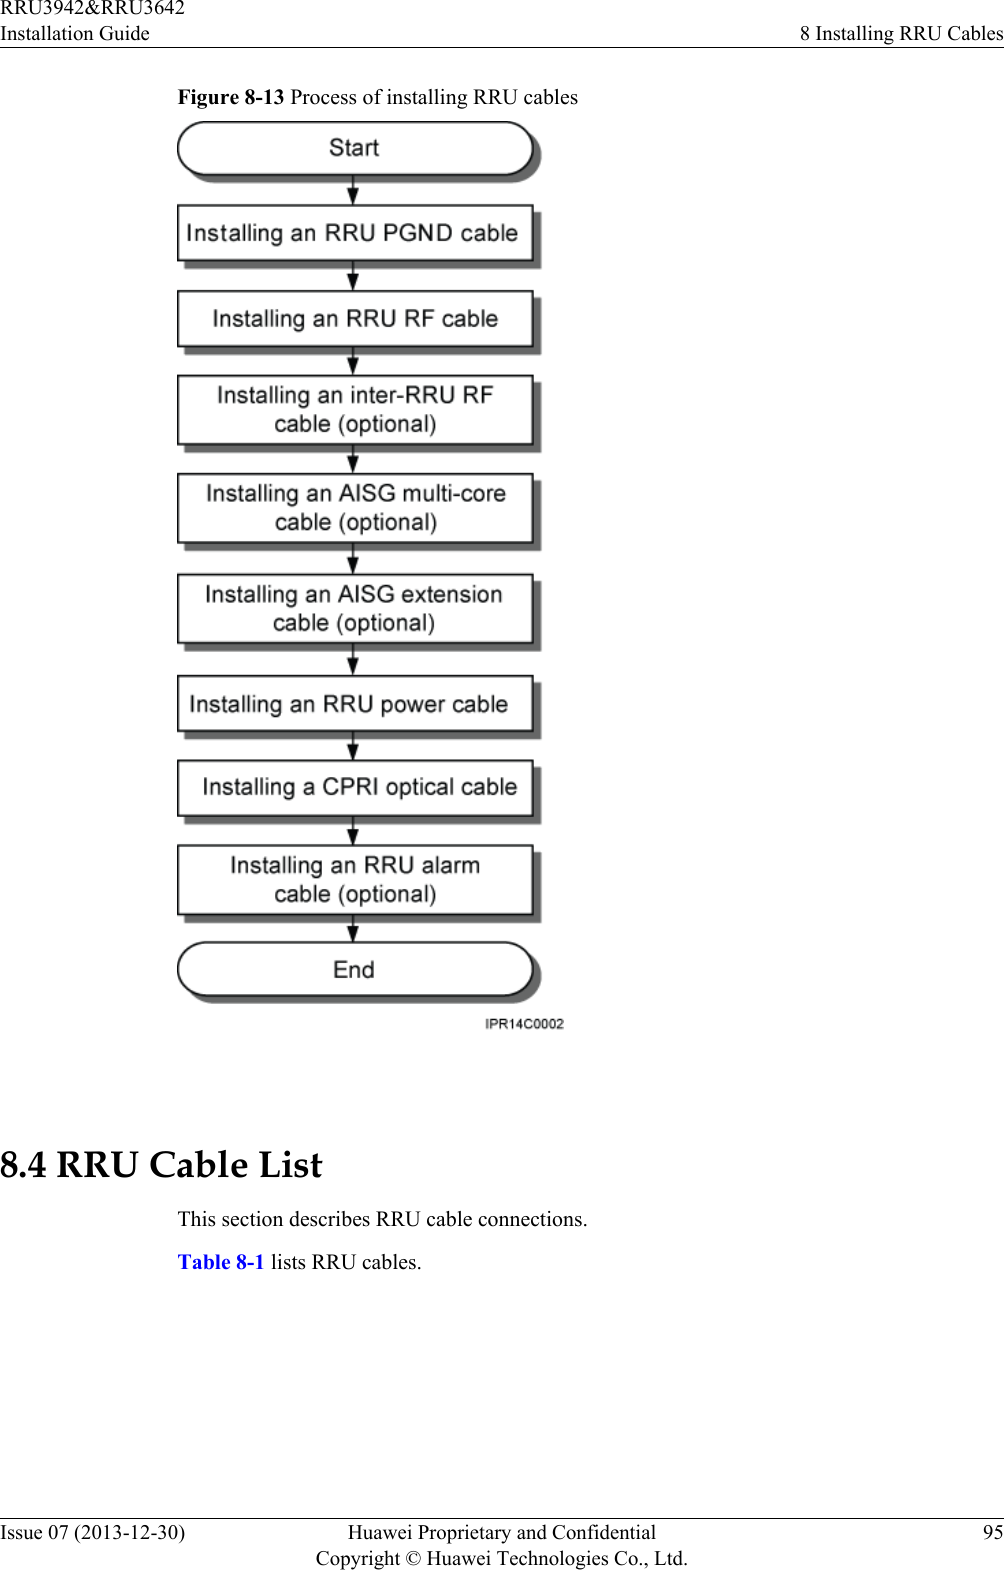 Figure 8-13 Process of installing RRU cables 8.4 RRU Cable ListThis section describes RRU cable connections.Table 8-1 lists RRU cables.RRU3942&amp;RRU3642Installation Guide 8 Installing RRU CablesIssue 07 (2013-12-30) Huawei Proprietary and ConfidentialCopyright © Huawei Technologies Co., Ltd.95